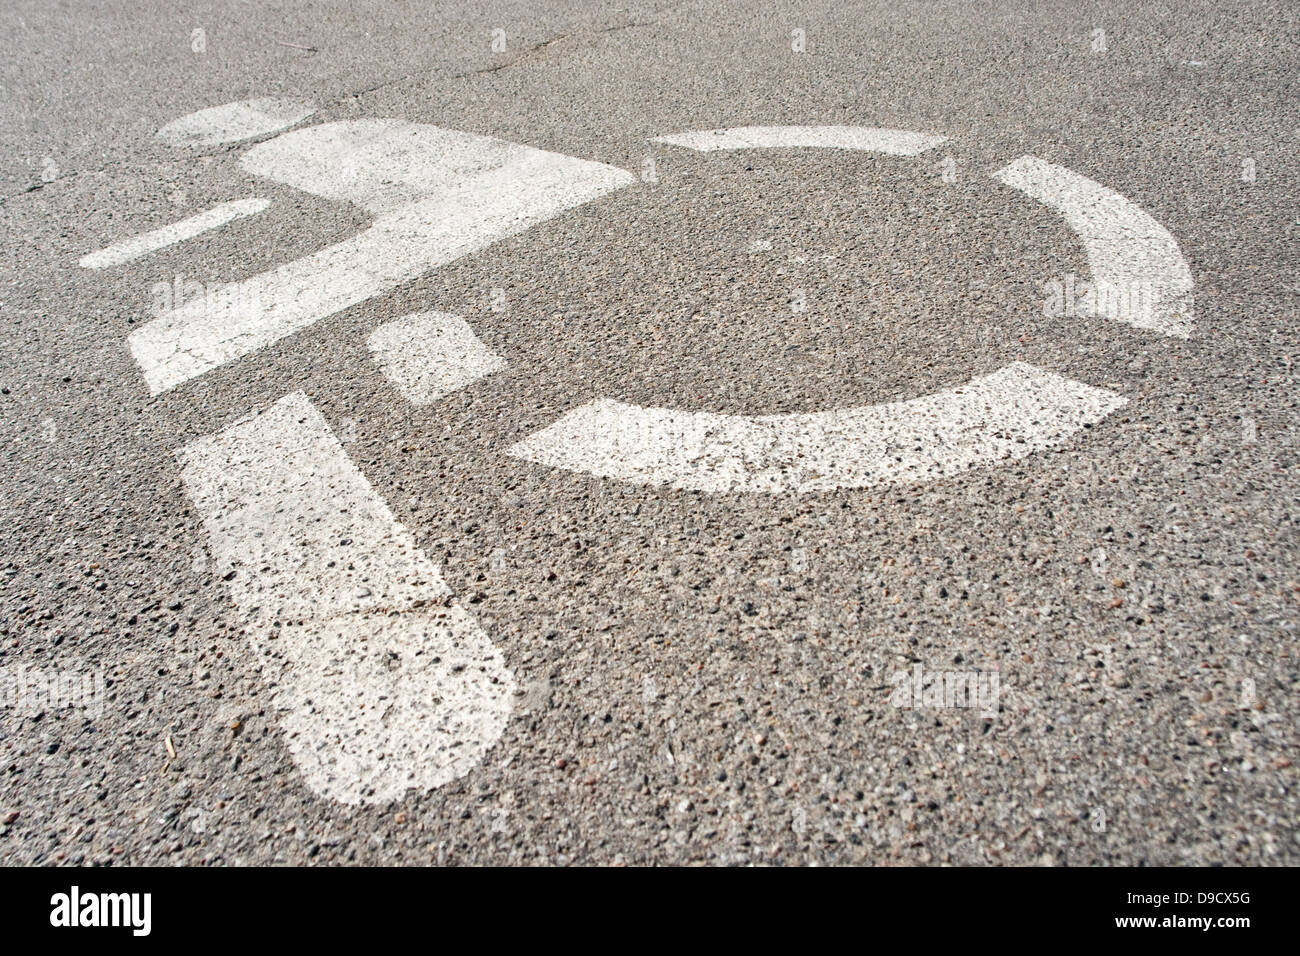 Parking space for the disabled Stock Photo